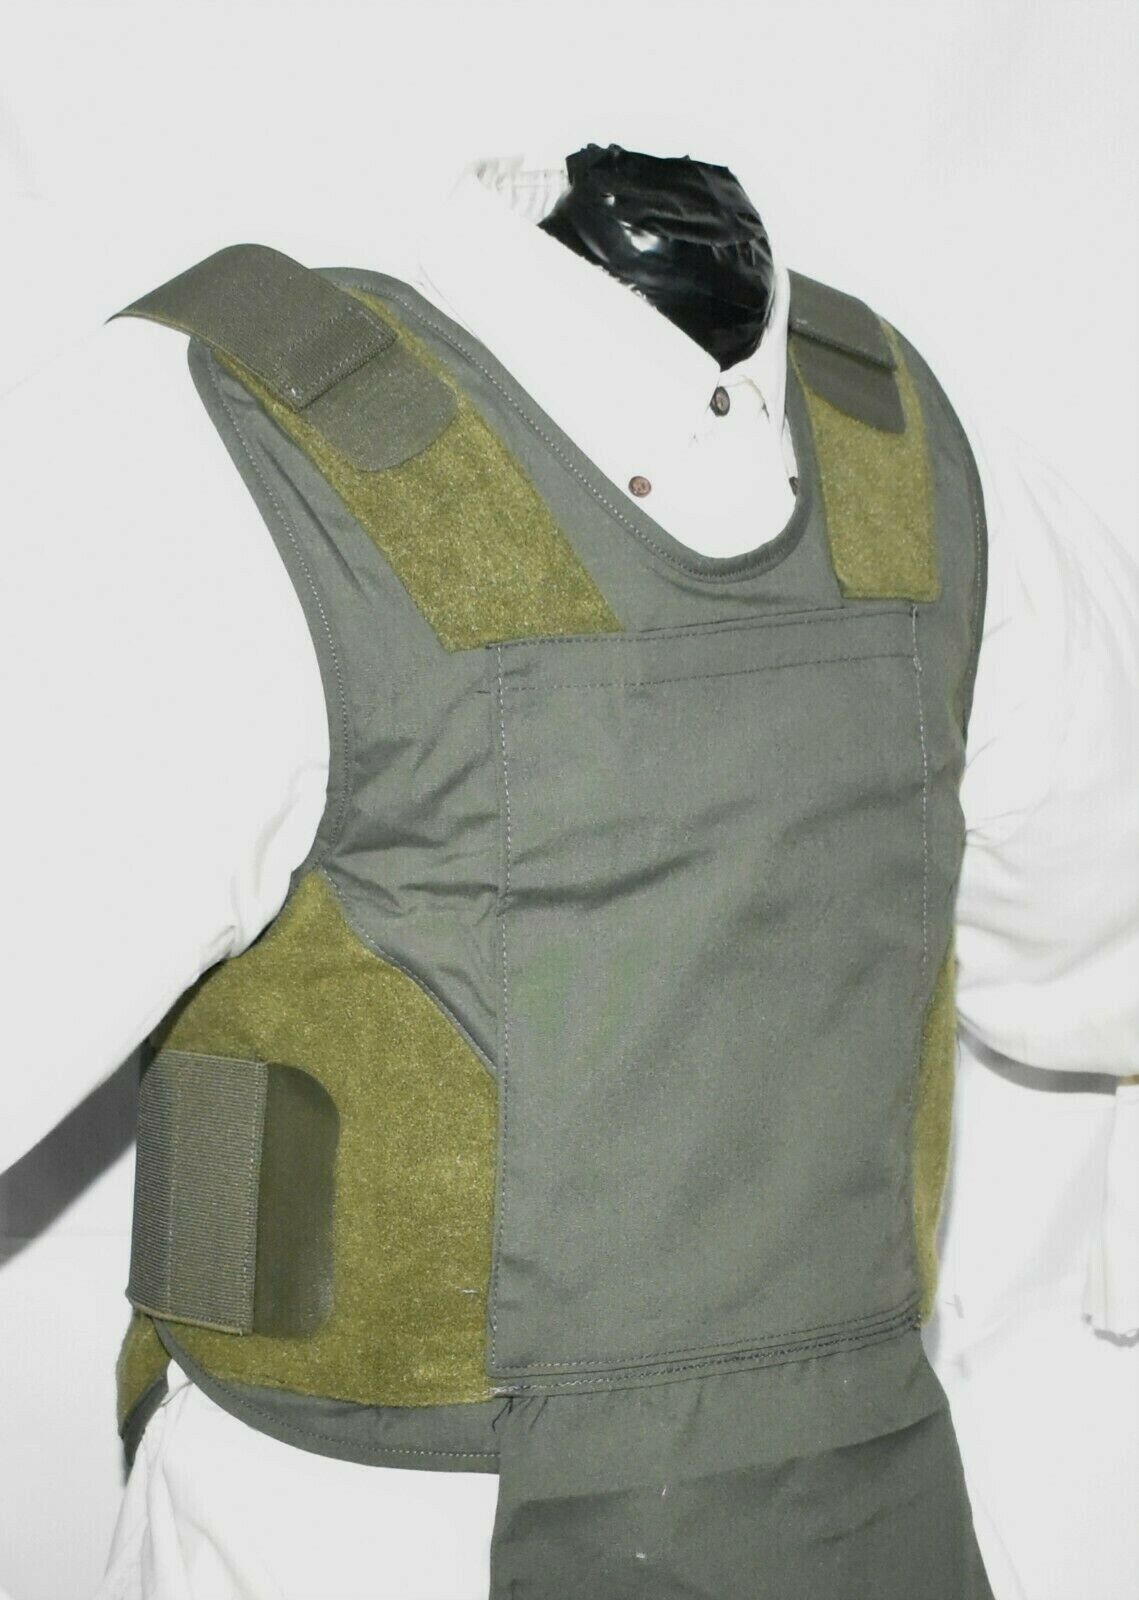 New Small Second Chance Lo Vis Concealable Vest IIIA  Body Armor Bullet Proof 